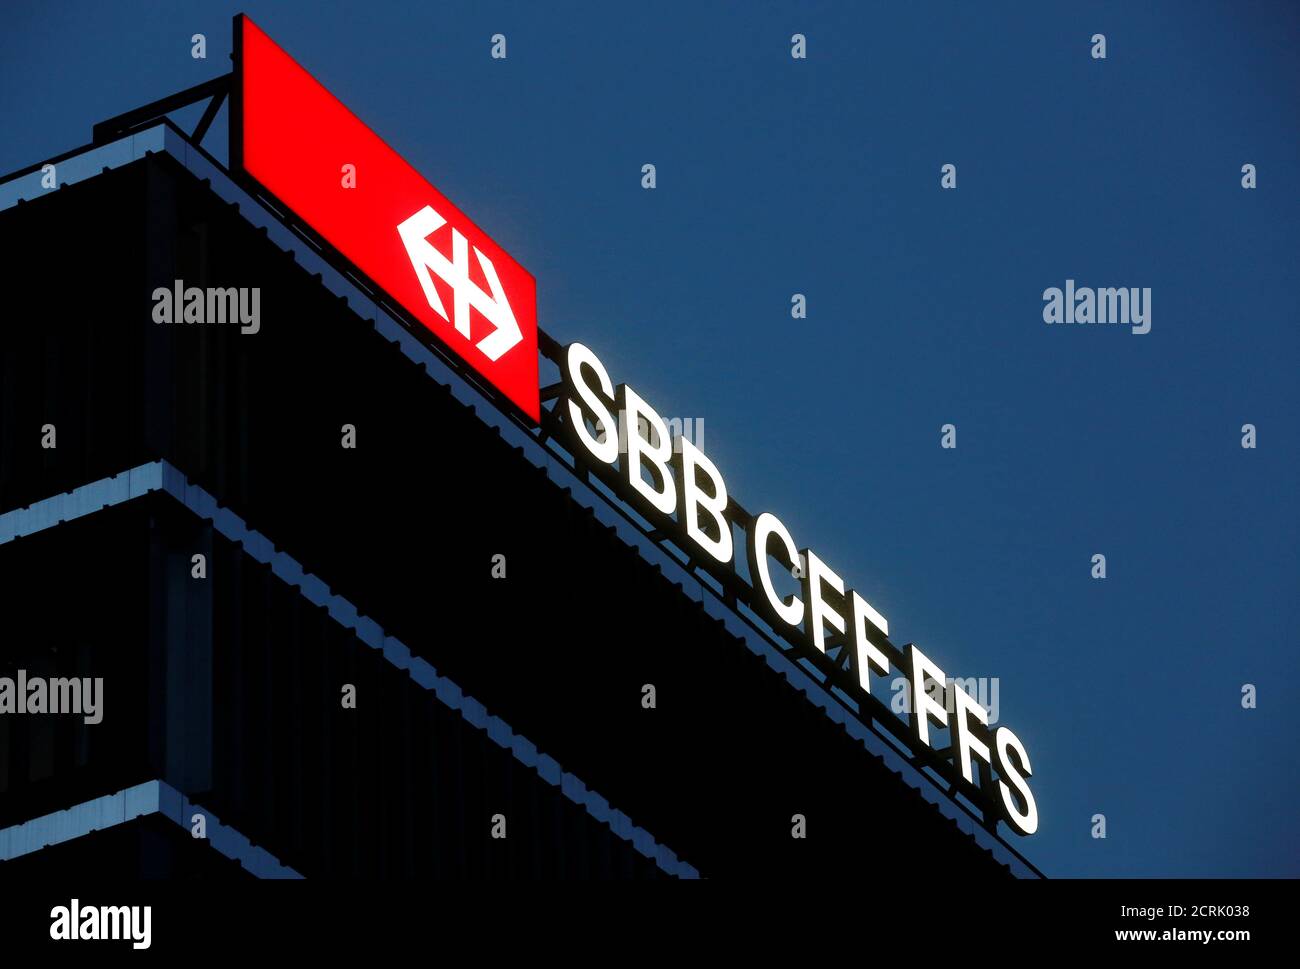 Page 3 - Sbb High Resolution Stock Photography and Images - Alamy